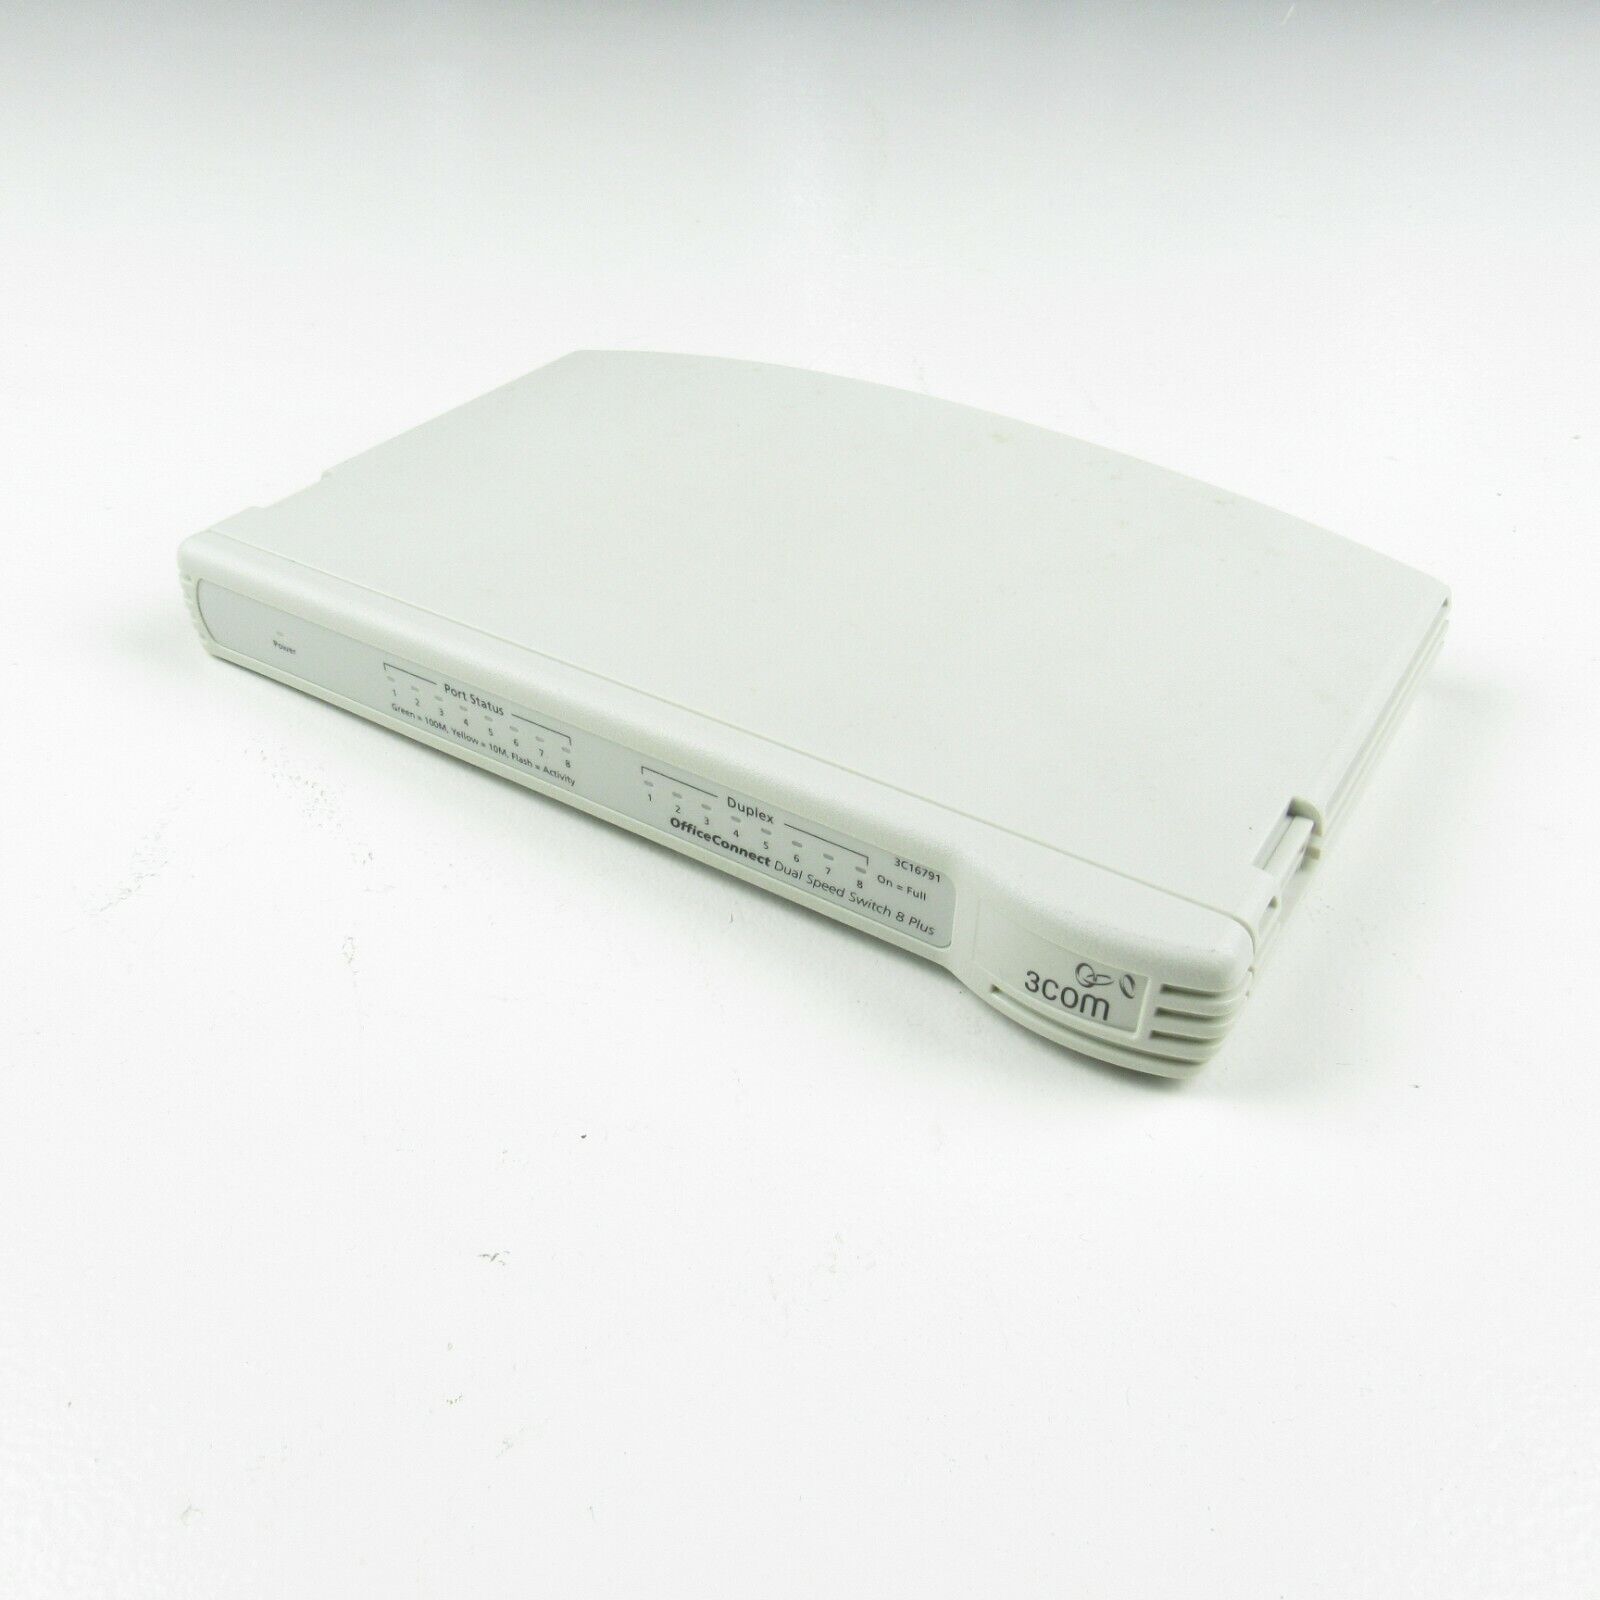 3COM OfficeConnect Dual Speed Switch 8 Plus